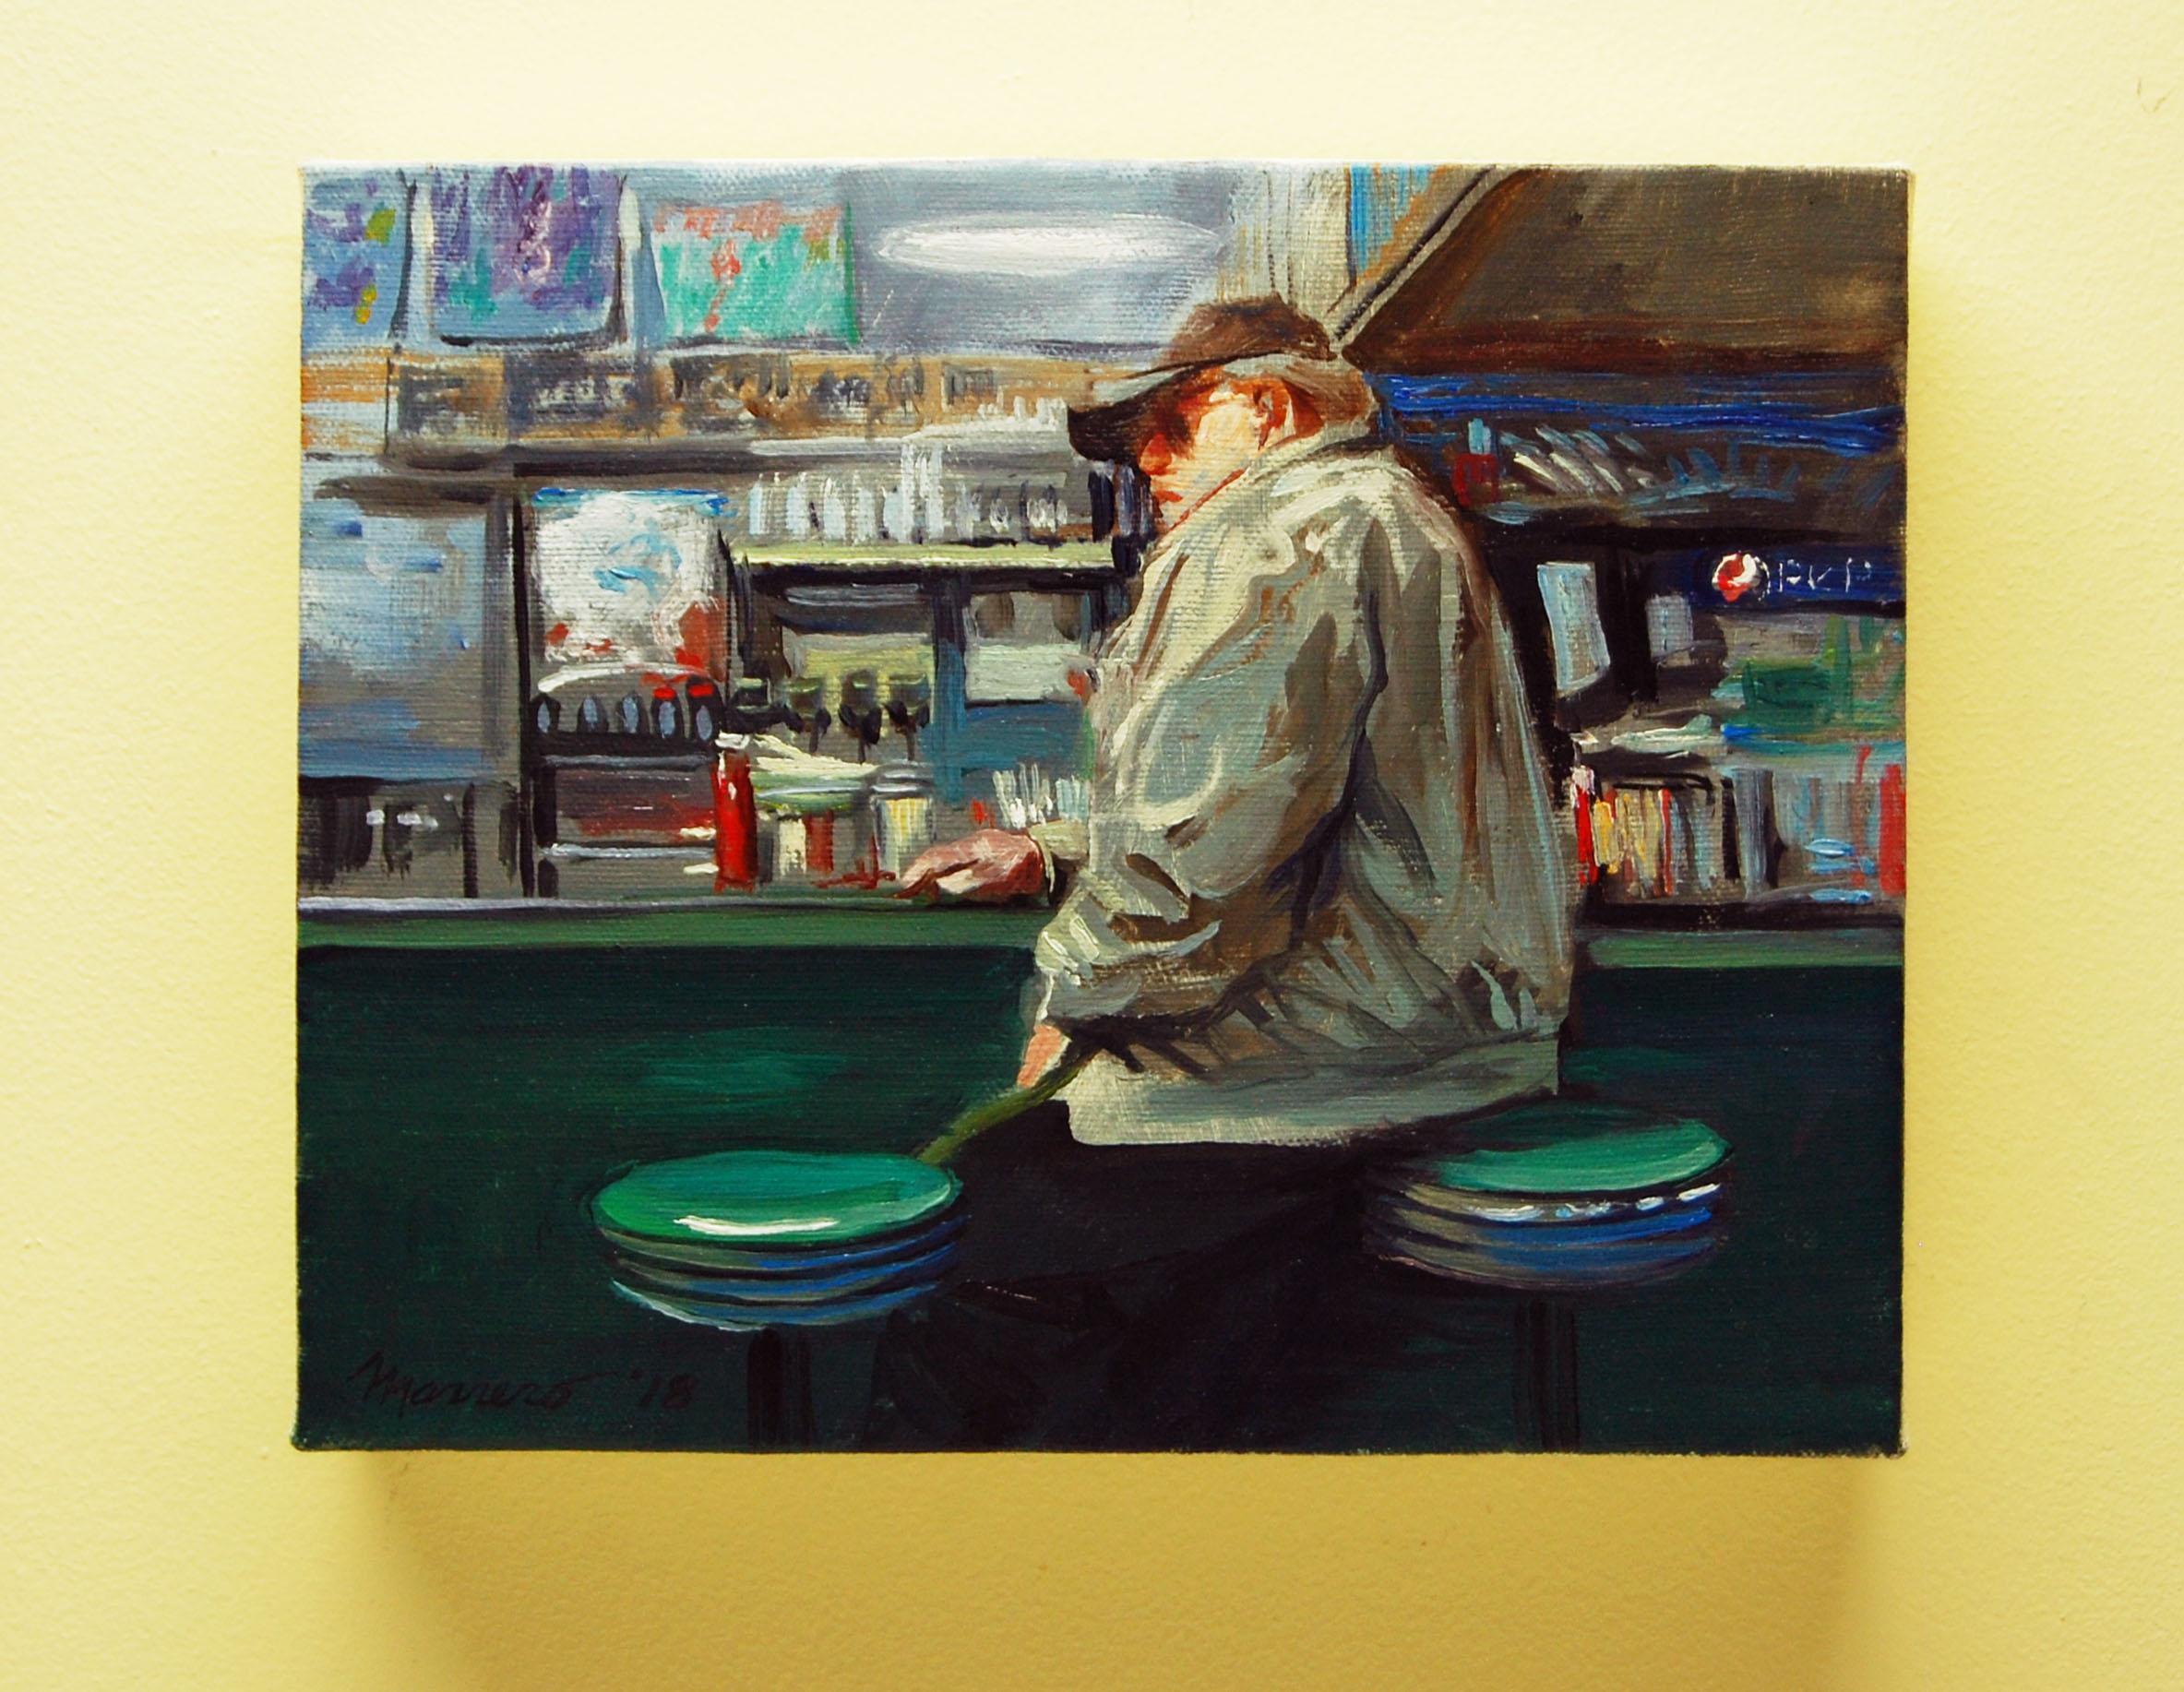 At the Counter - American Realist Painting by Onelio Marrero